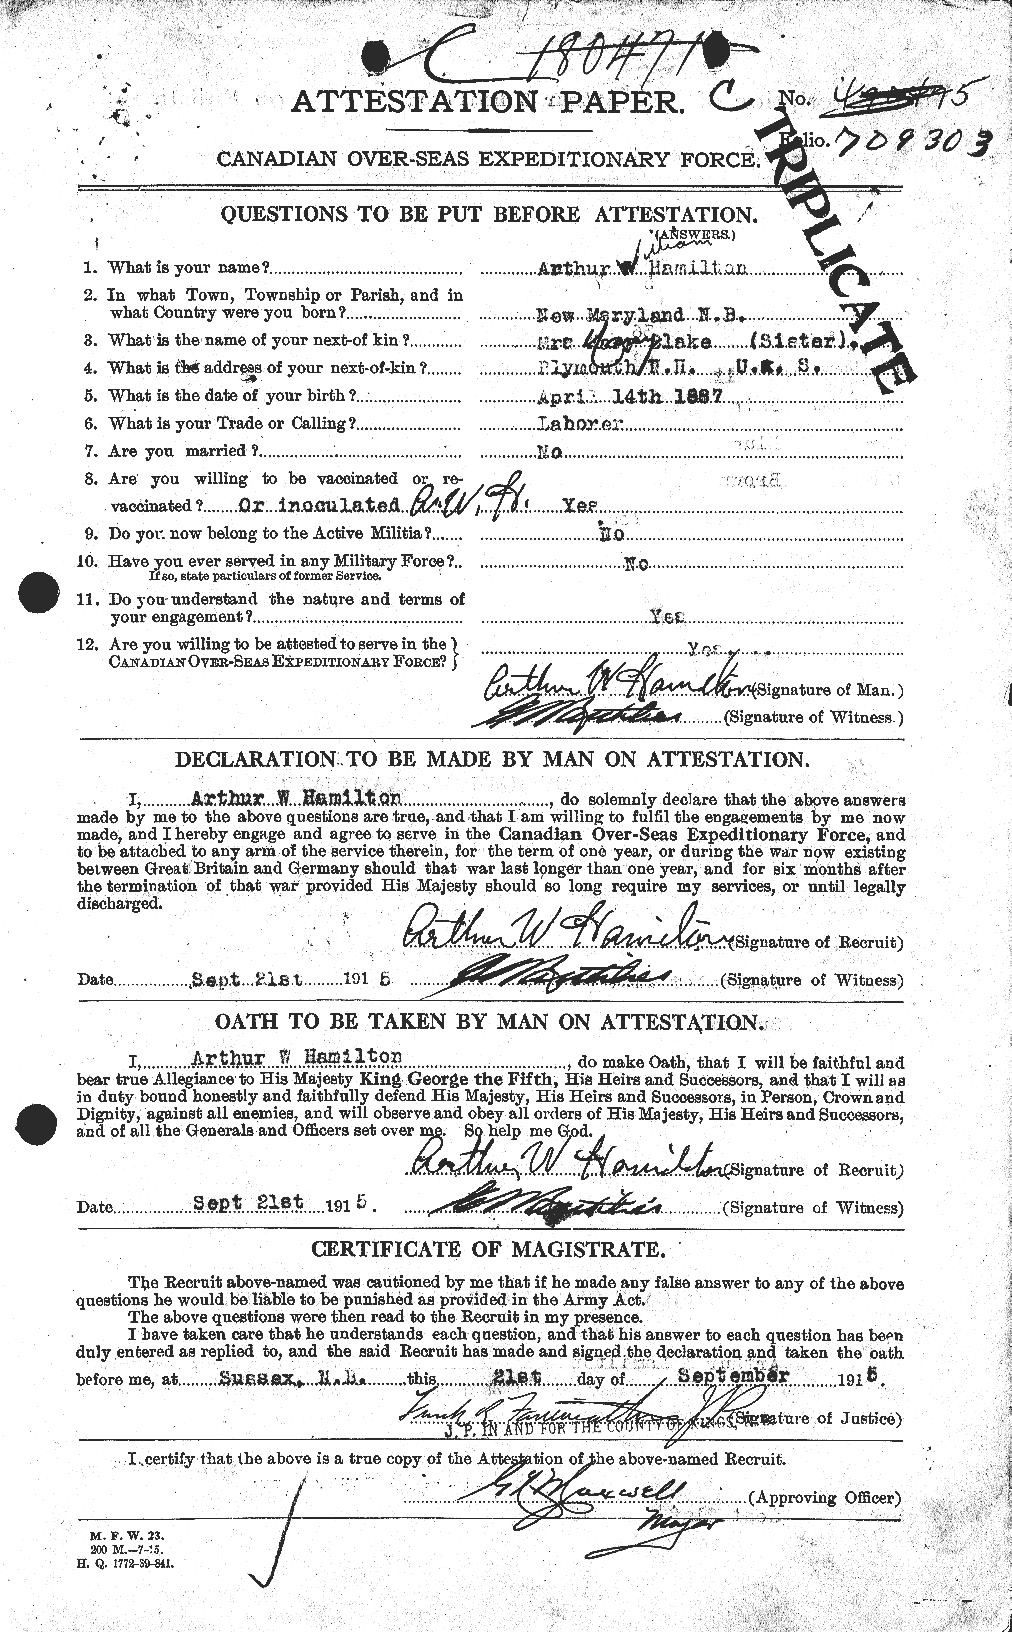 Personnel Records of the First World War - CEF 375257a